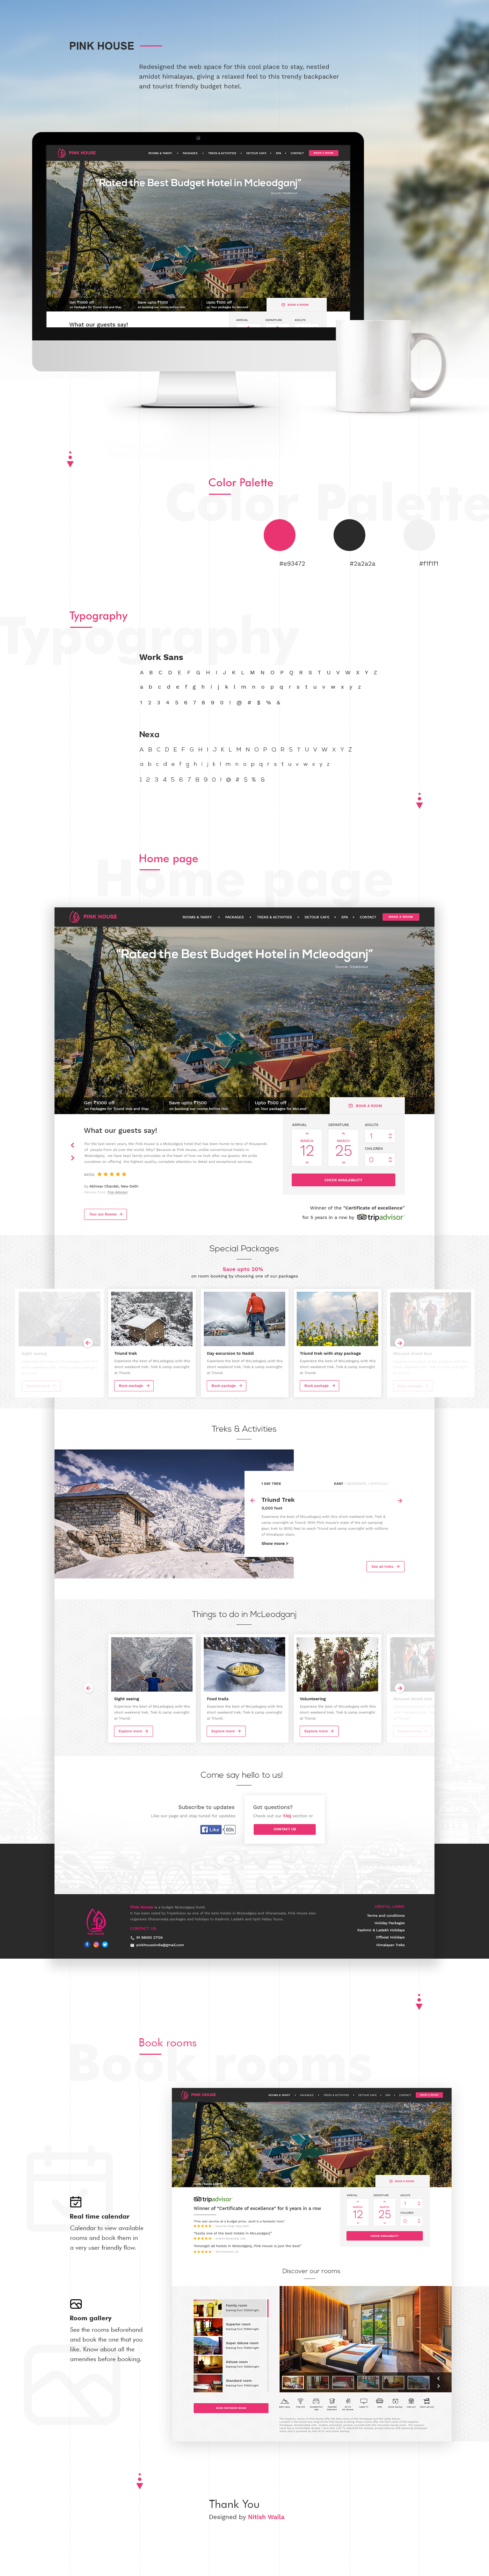 Website design Travel Budget Backpacking UI/UX Holiday India adventure mobile